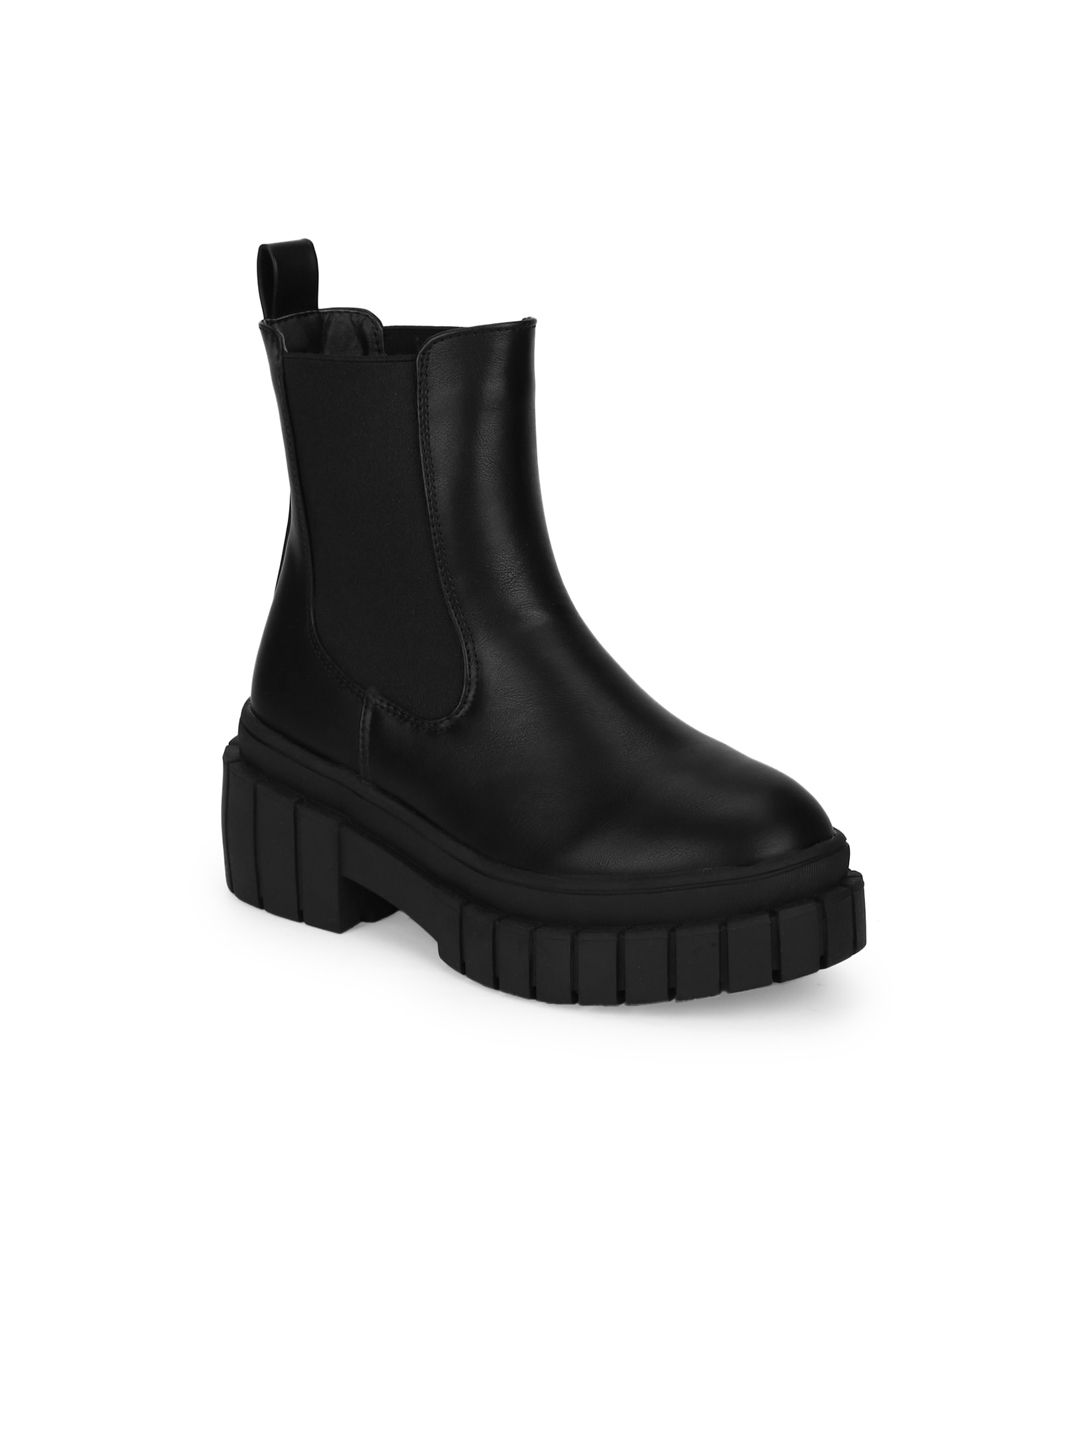 Truffle Collection Black Solid Block Heeled Boots Price in India